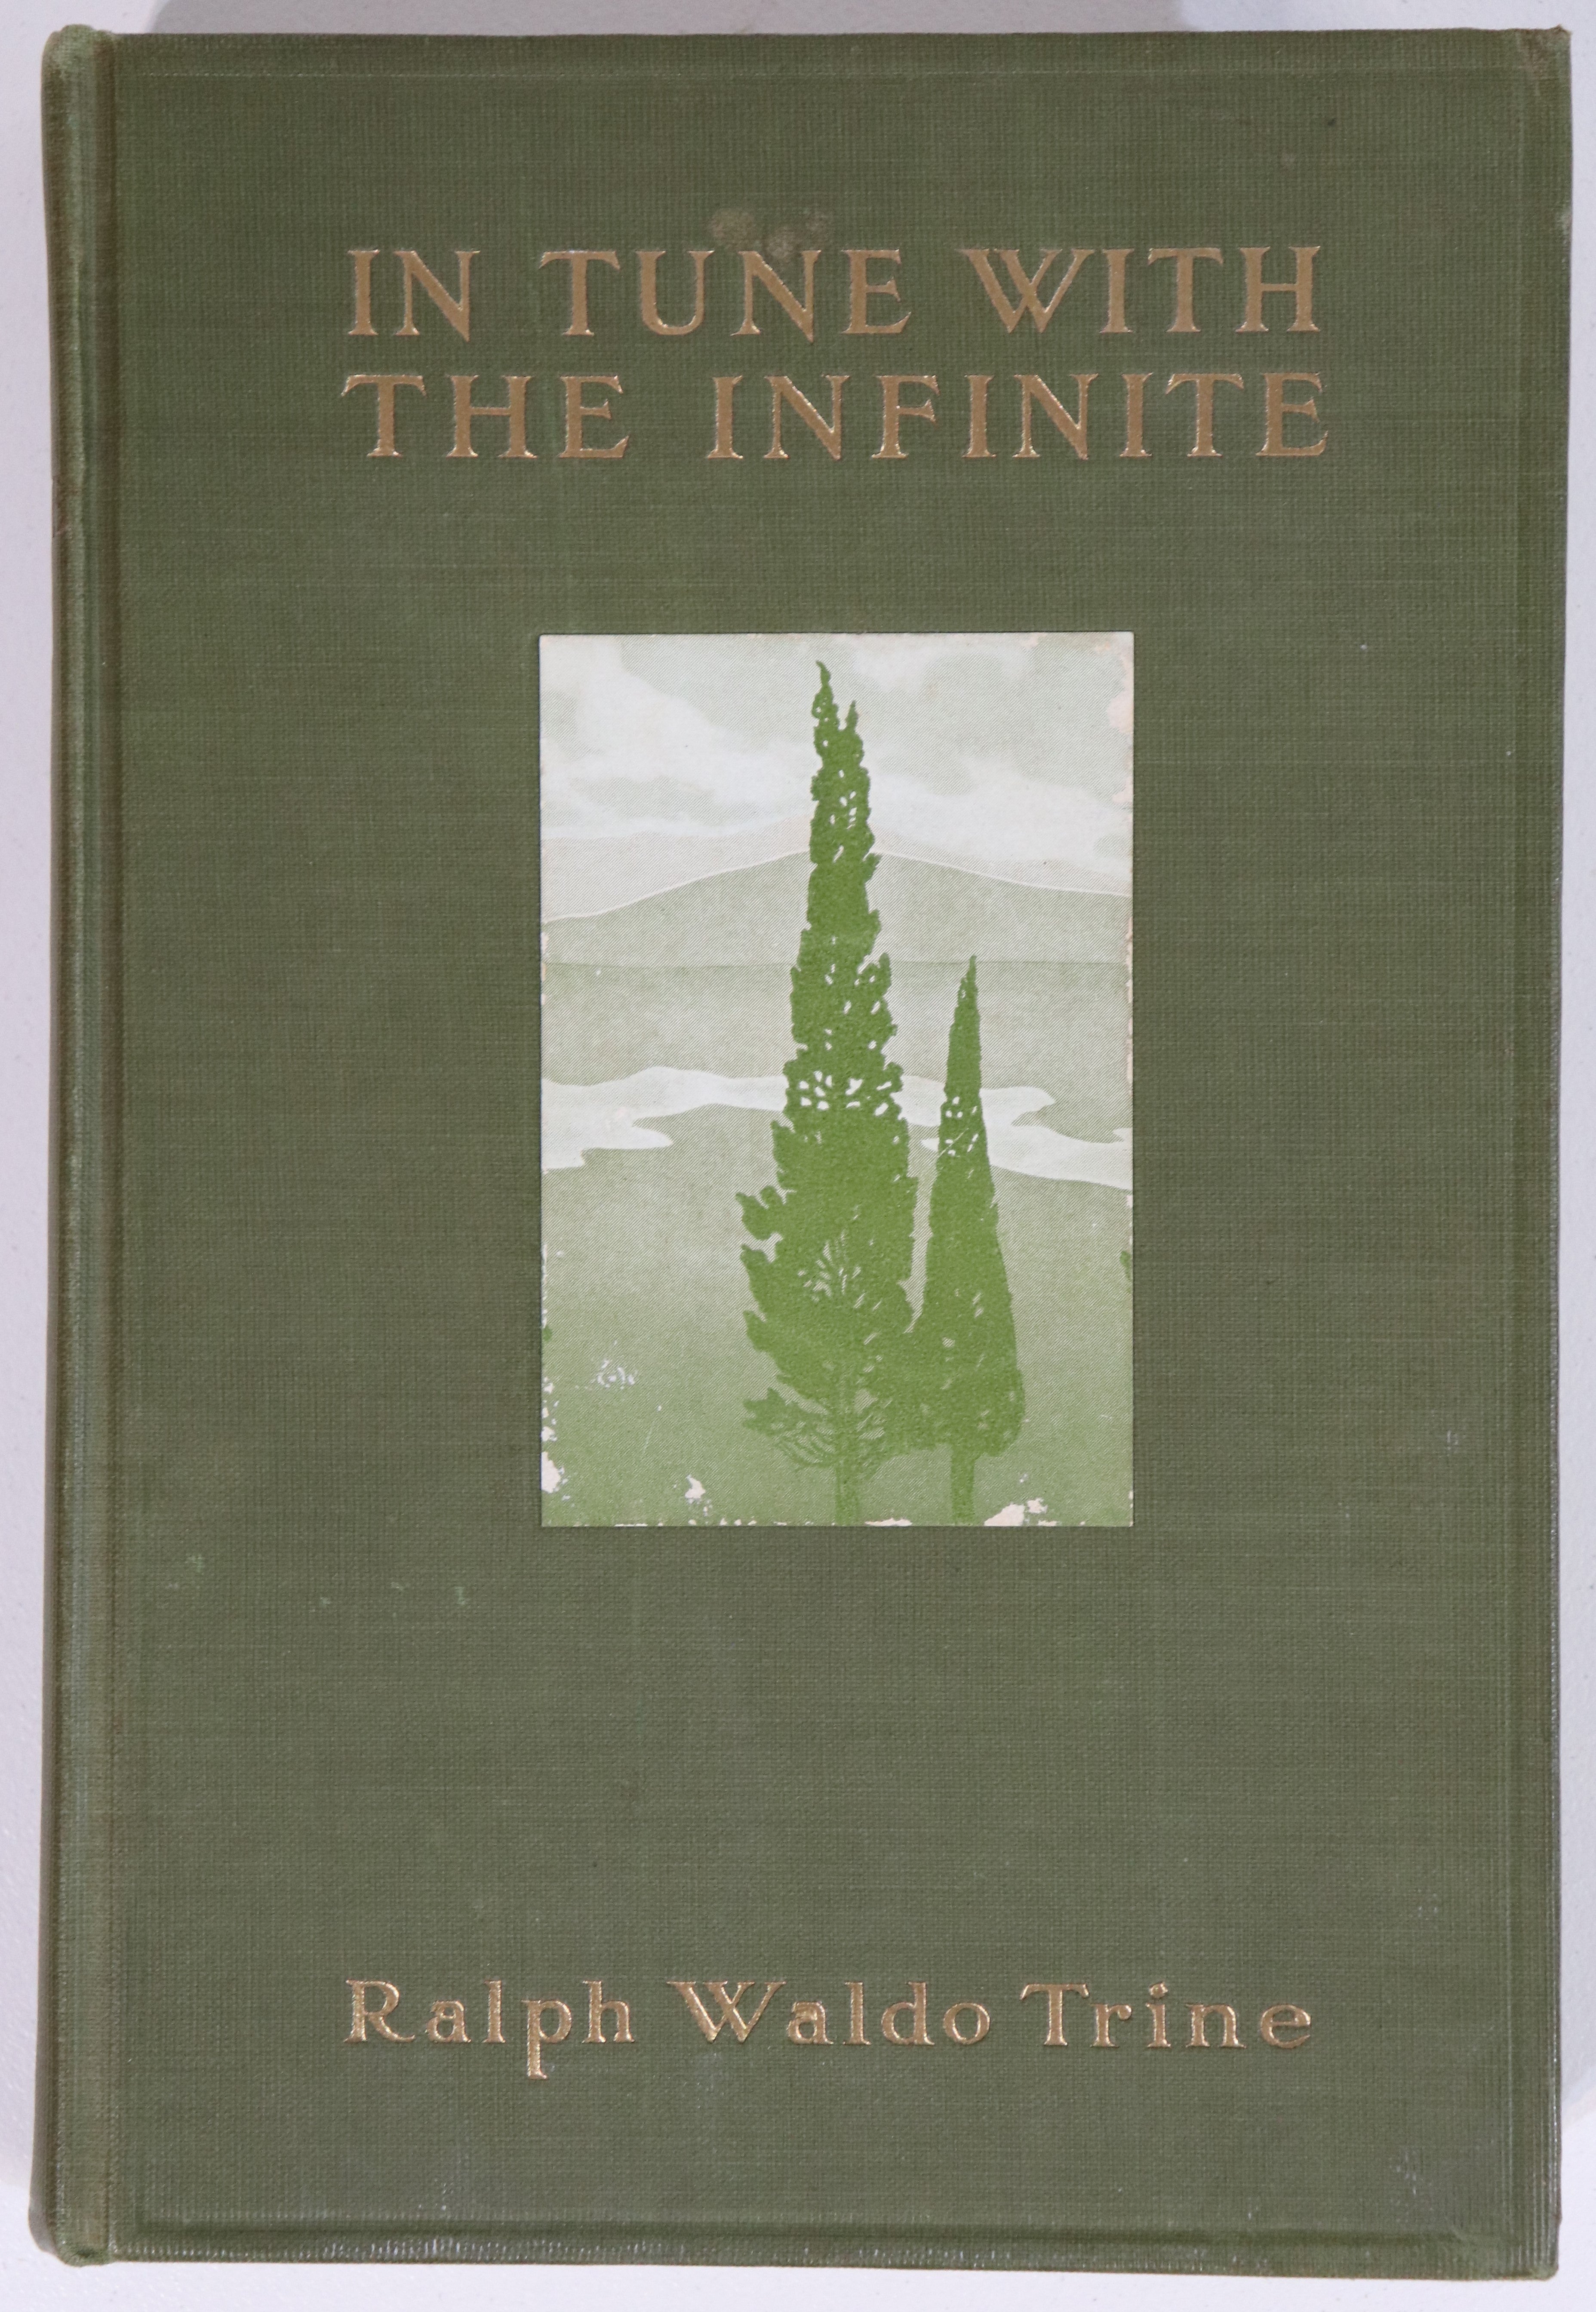 In Tune With The Infinite by Ralph W. Trine - 1910 - Antique Theology Book